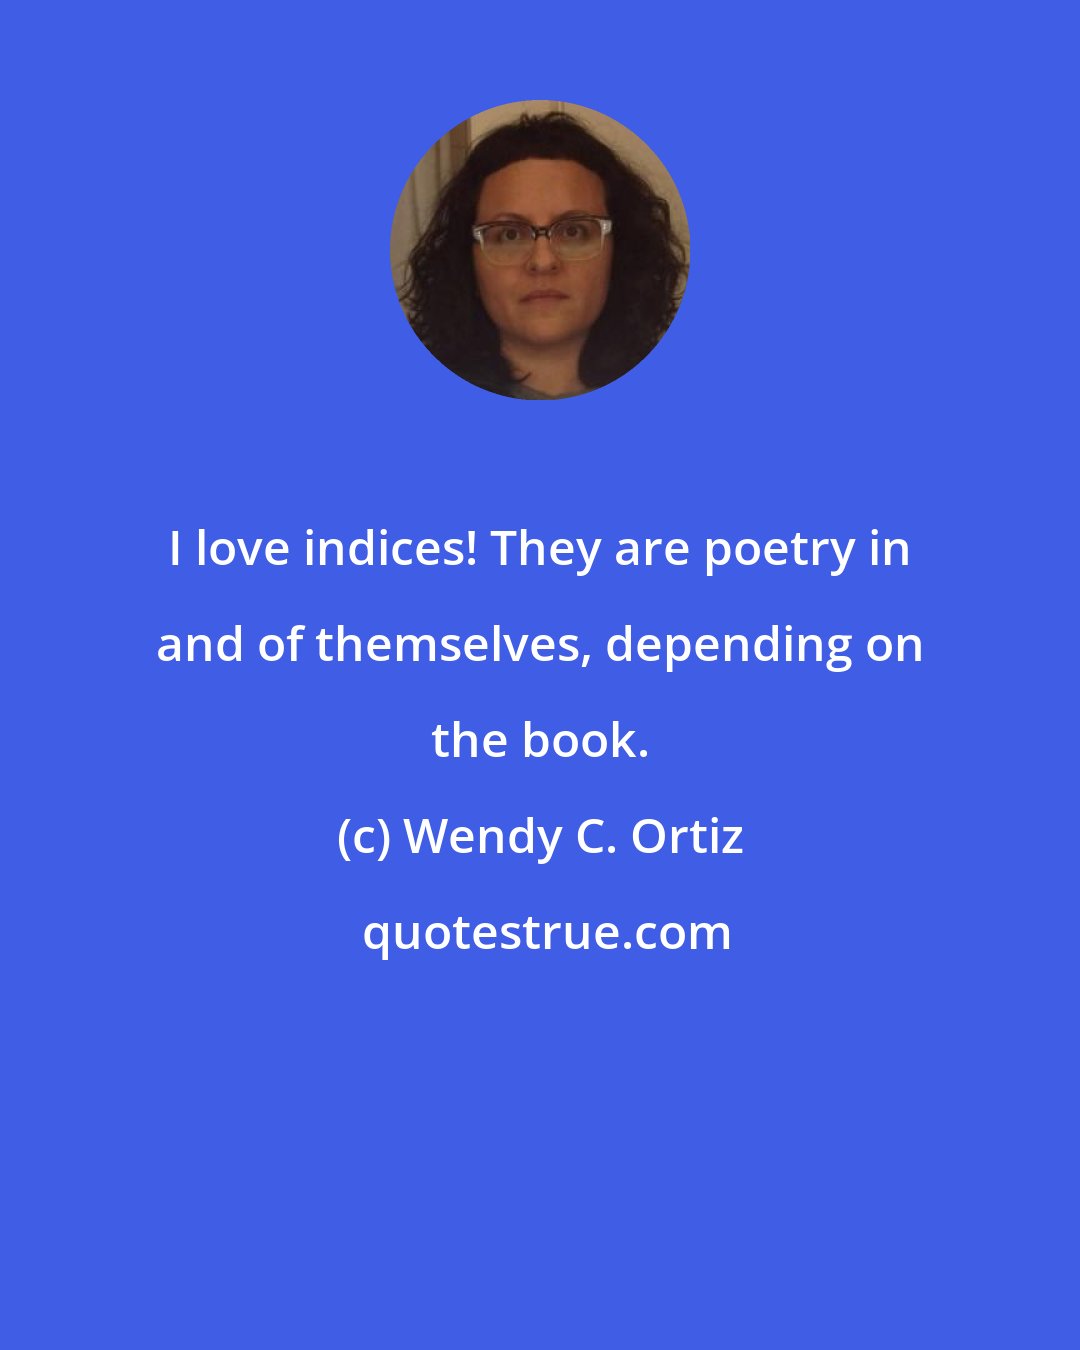 Wendy C. Ortiz: I love indices! They are poetry in and of themselves, depending on the book.